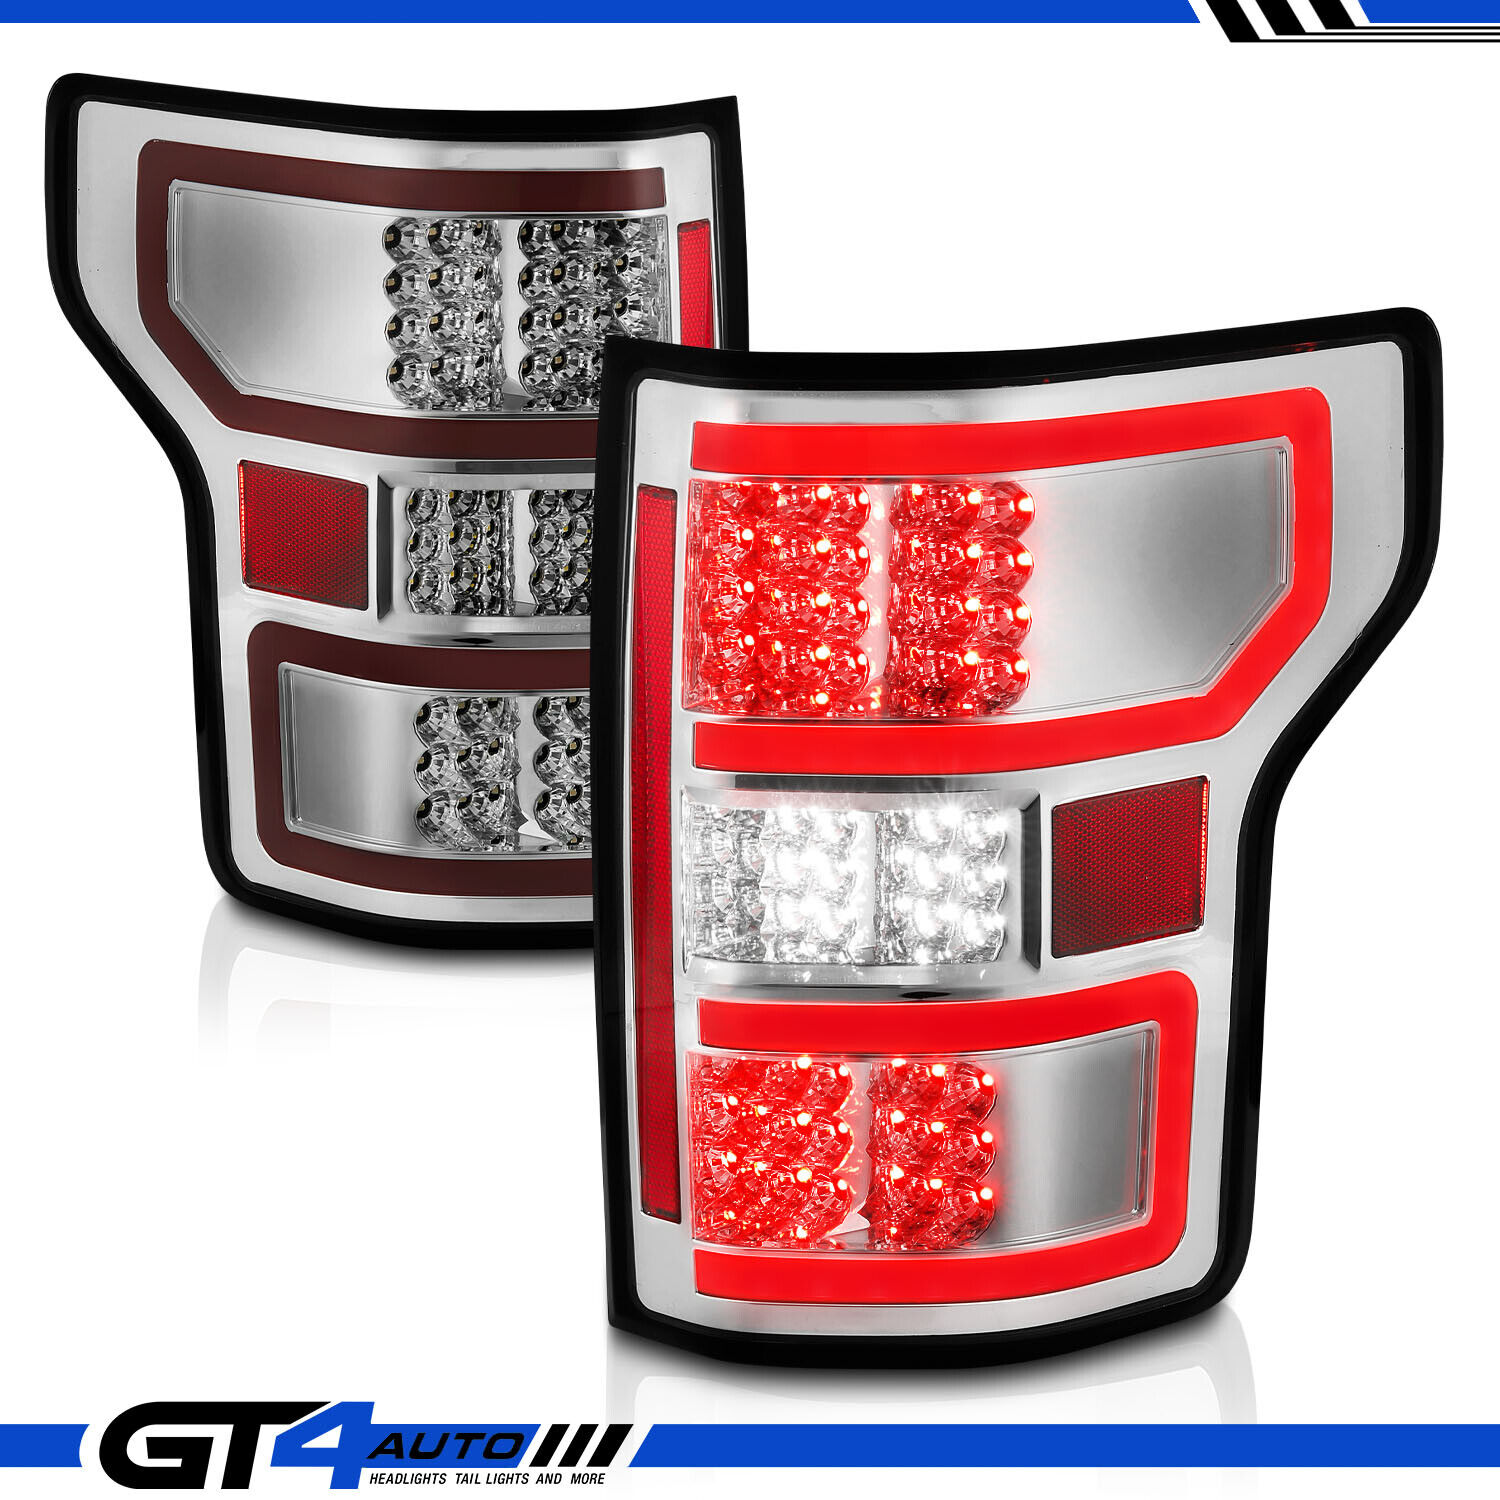 Full LED Light Tube Chrome Replacement Taillights Set for 2018-2019 Ford F150